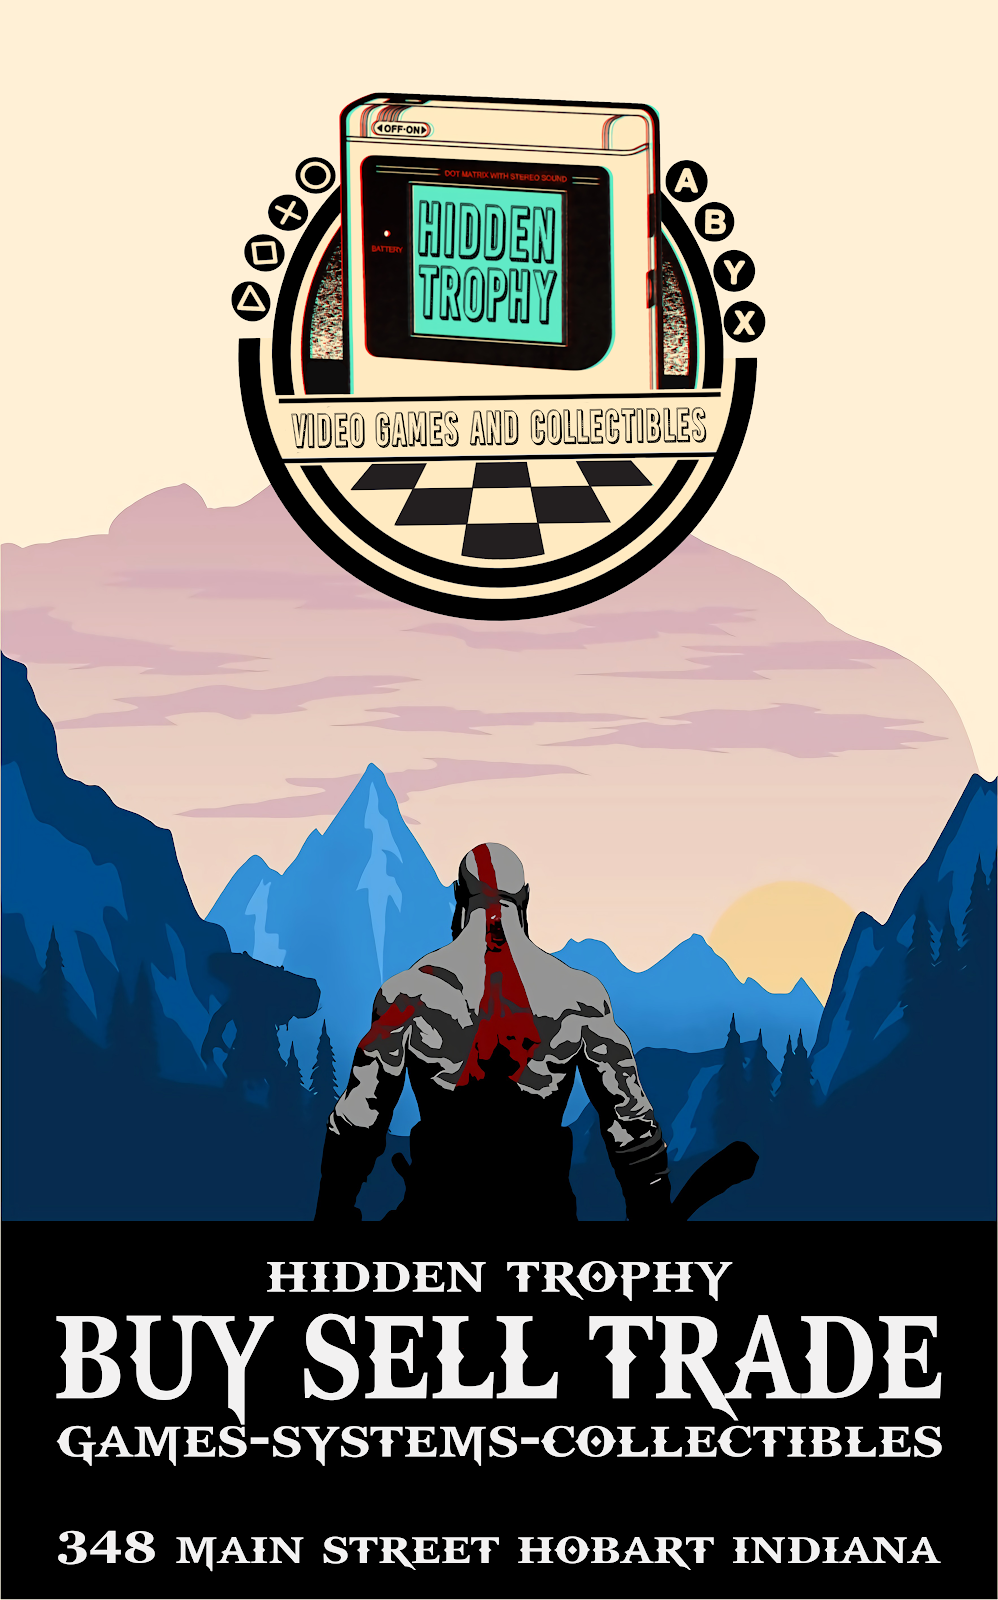 Hidden Trophy Video Games and Collectibles | 348 Main St, Hobart, IN 46342 | Phone: (219) 973-2968